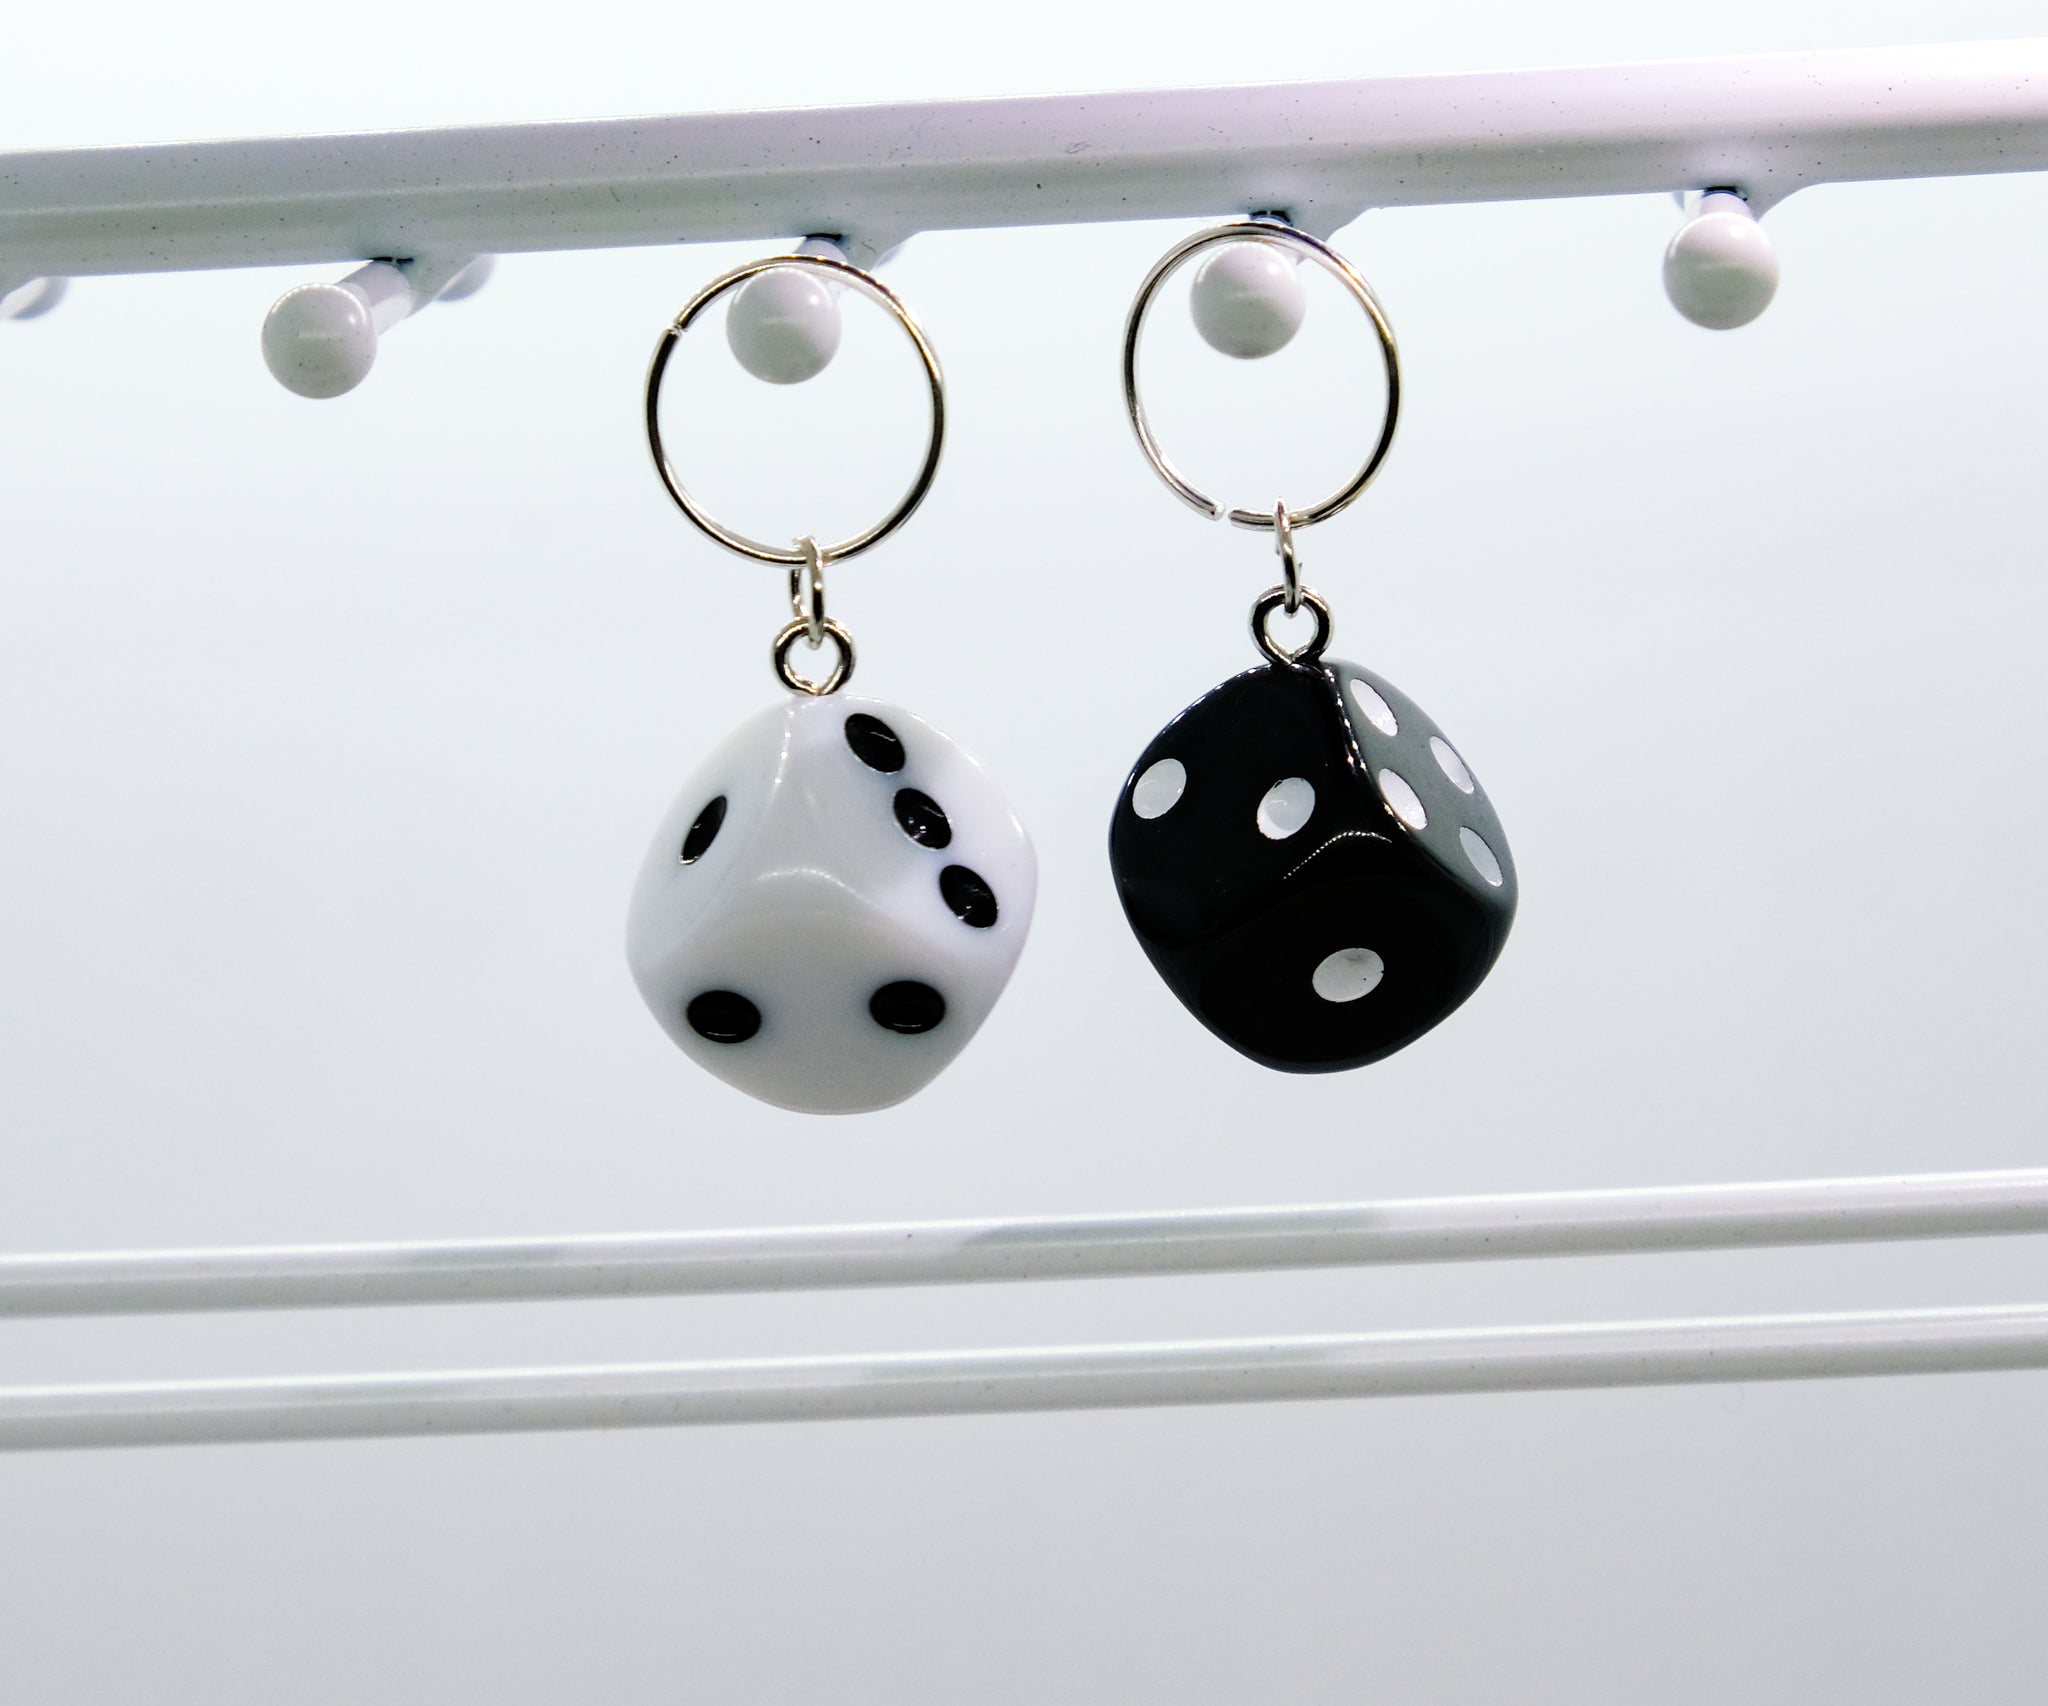 Black & White Dice Charms - 10 pack